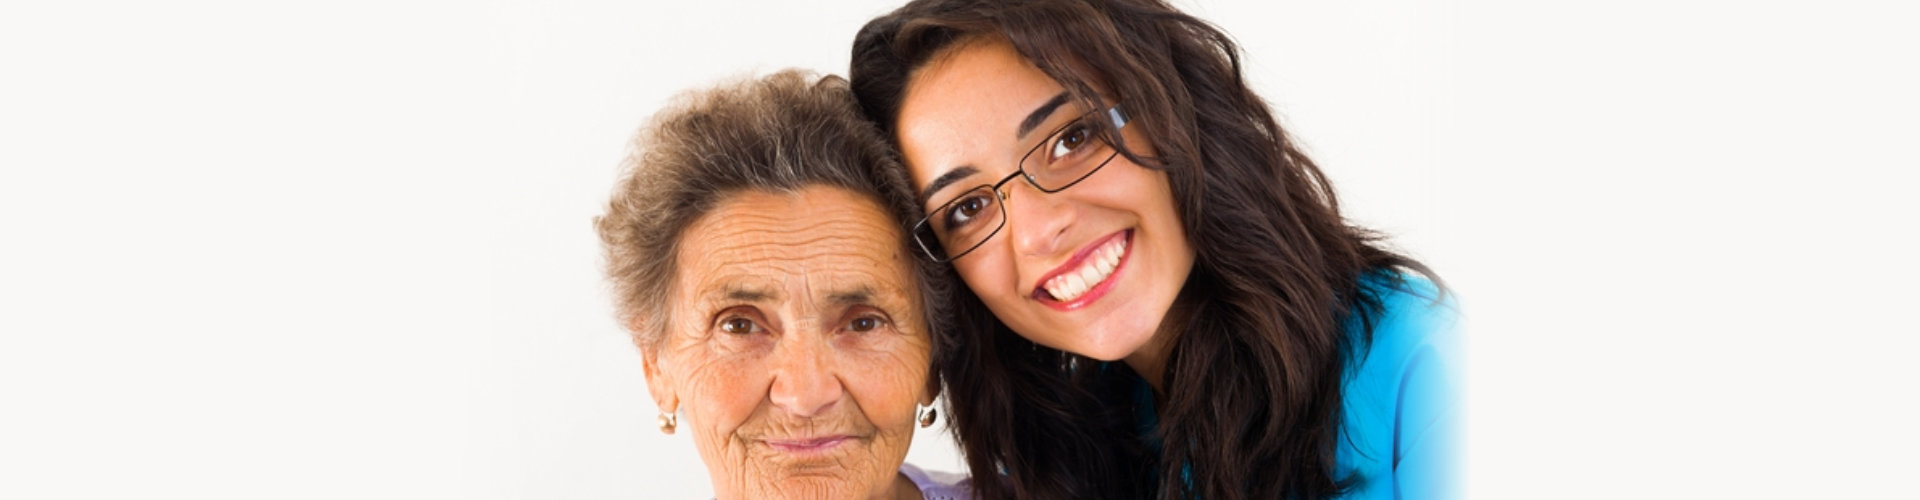 loving family member doctor caring about elderly grandmother